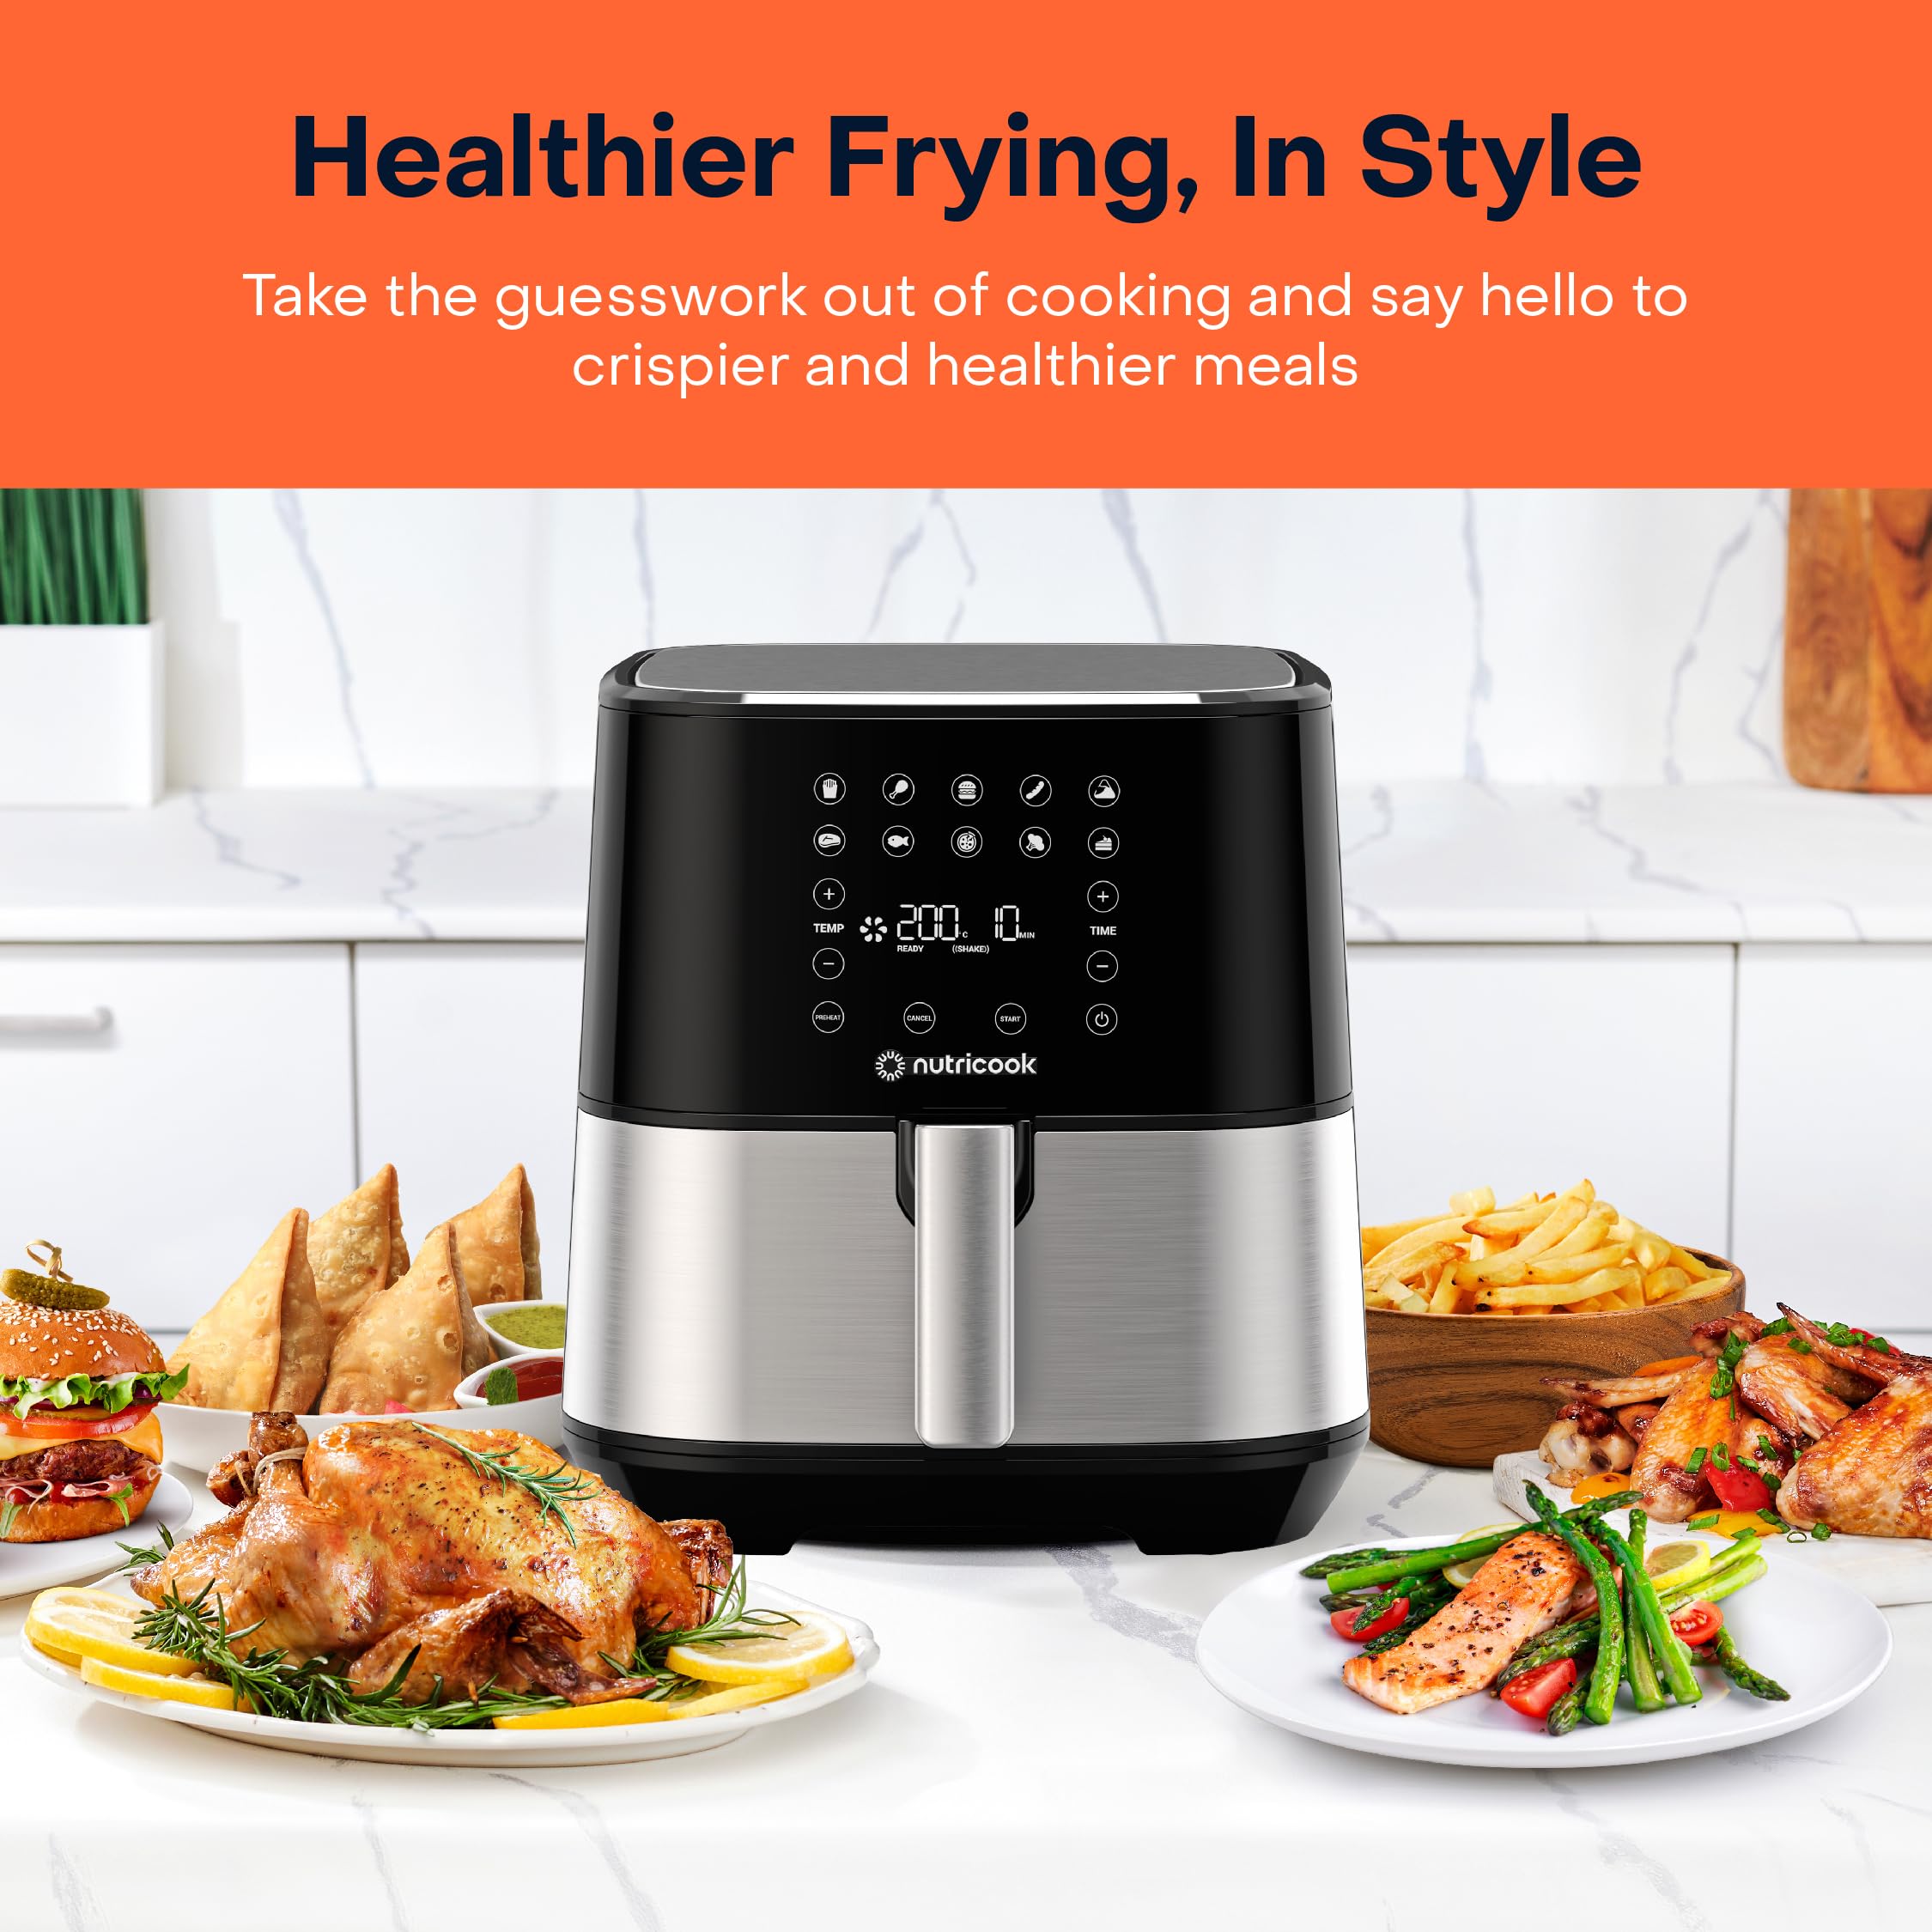 Nutricook Air Fryer 2, 5.5 Liters, 1700 Watts, Digital Control Panel Display, 10 Preset Programs With Built-In Preheat Function, Stainless Steel + CRED Chopper 650 ml, 1 yrs Warranty, Amazon exclusive